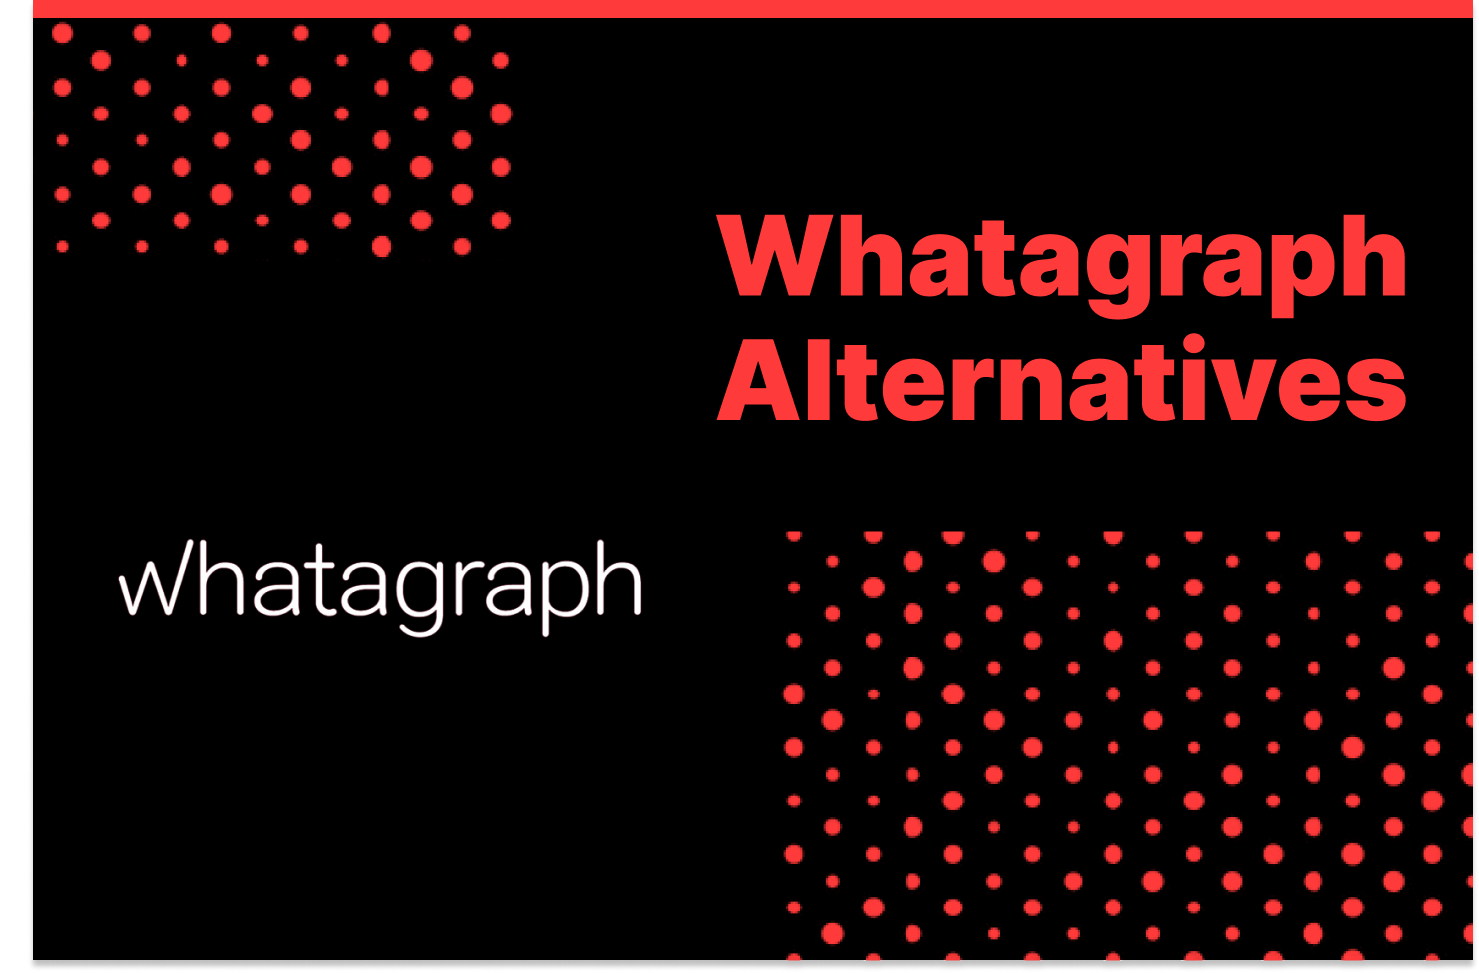 Top 7 Whatagraph Alternatives For 2022